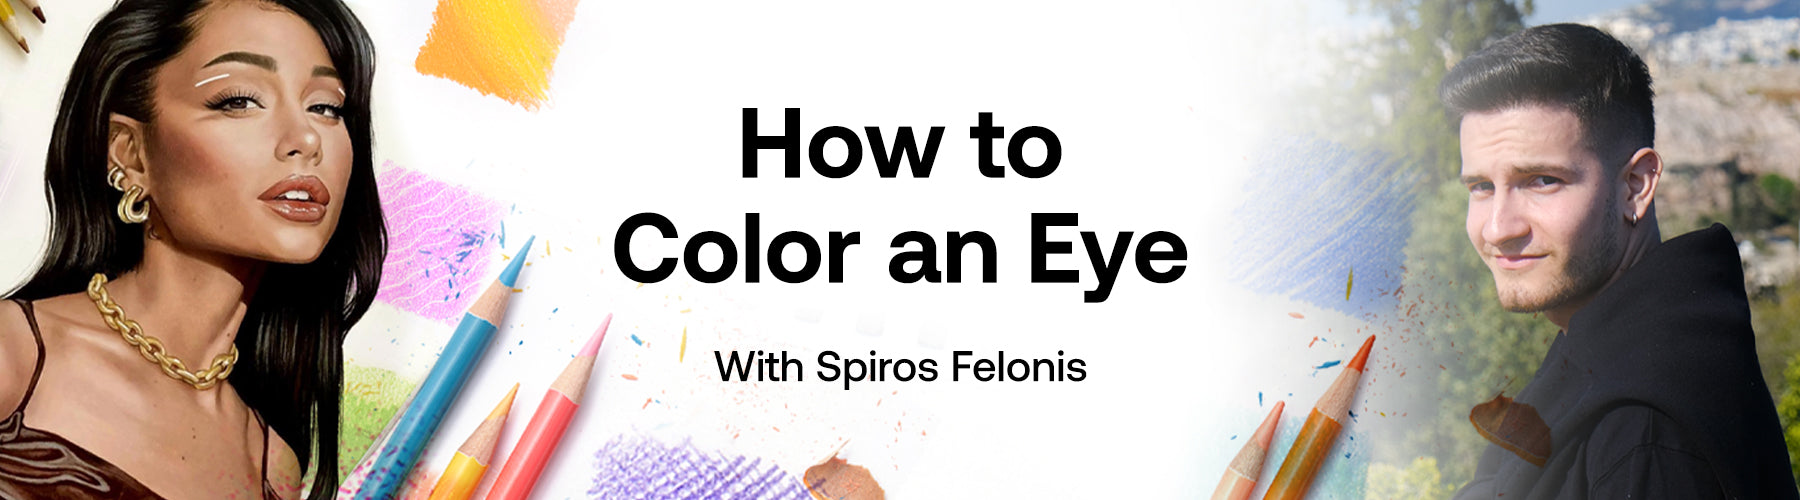 Coloring an Eye With Spiros Felonis